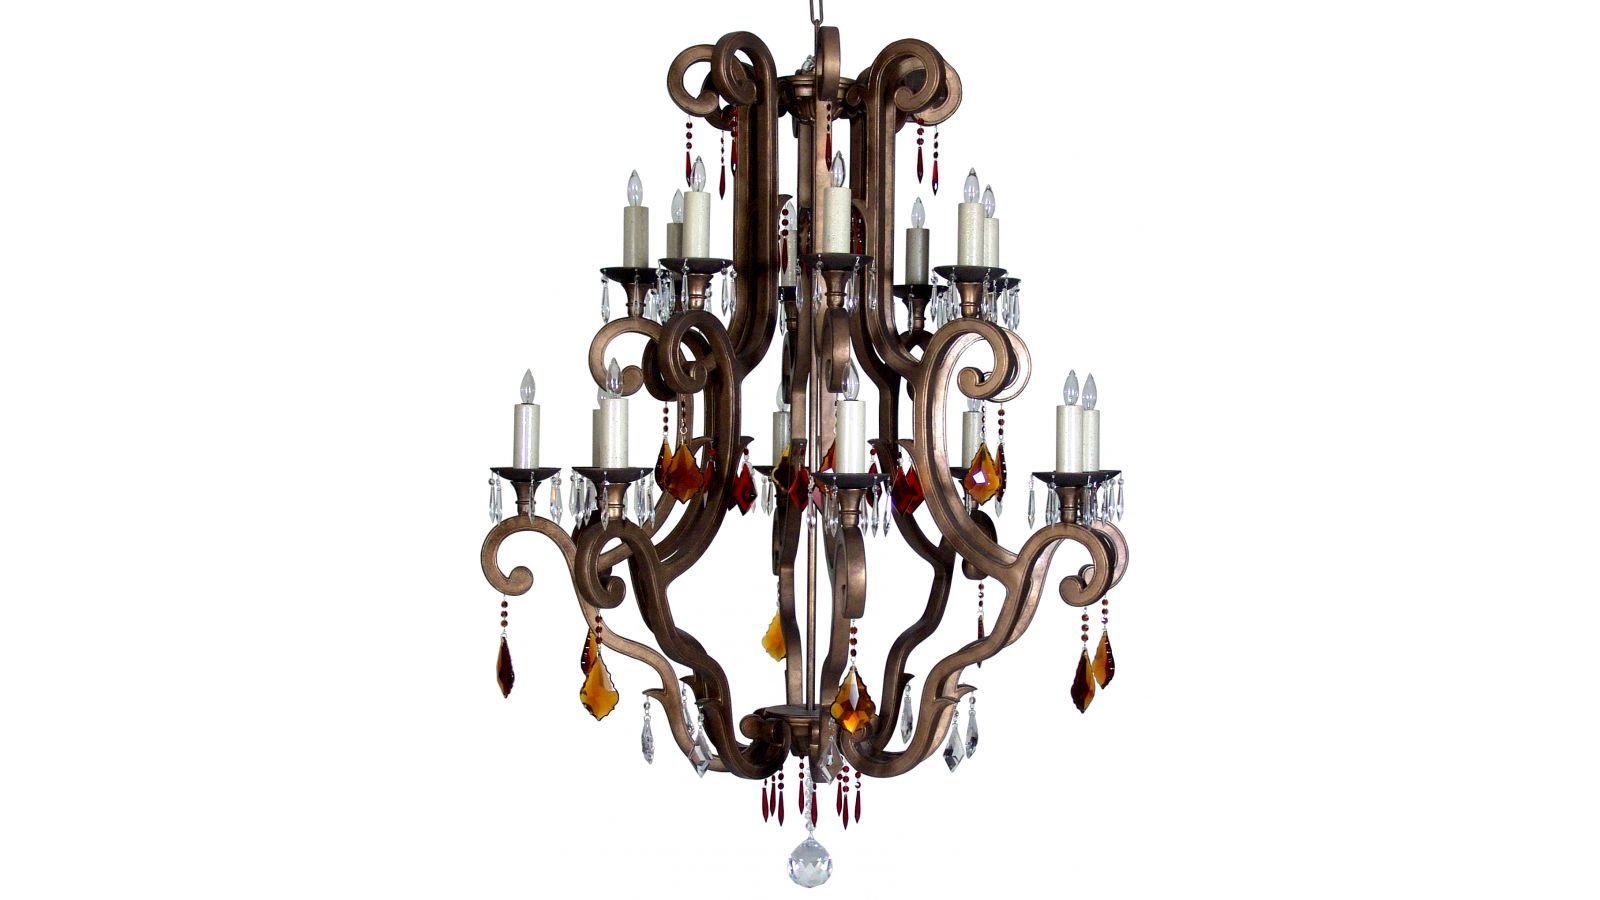 CL75353 Alhambra Chandelier (2 Tier) (8 Arms)